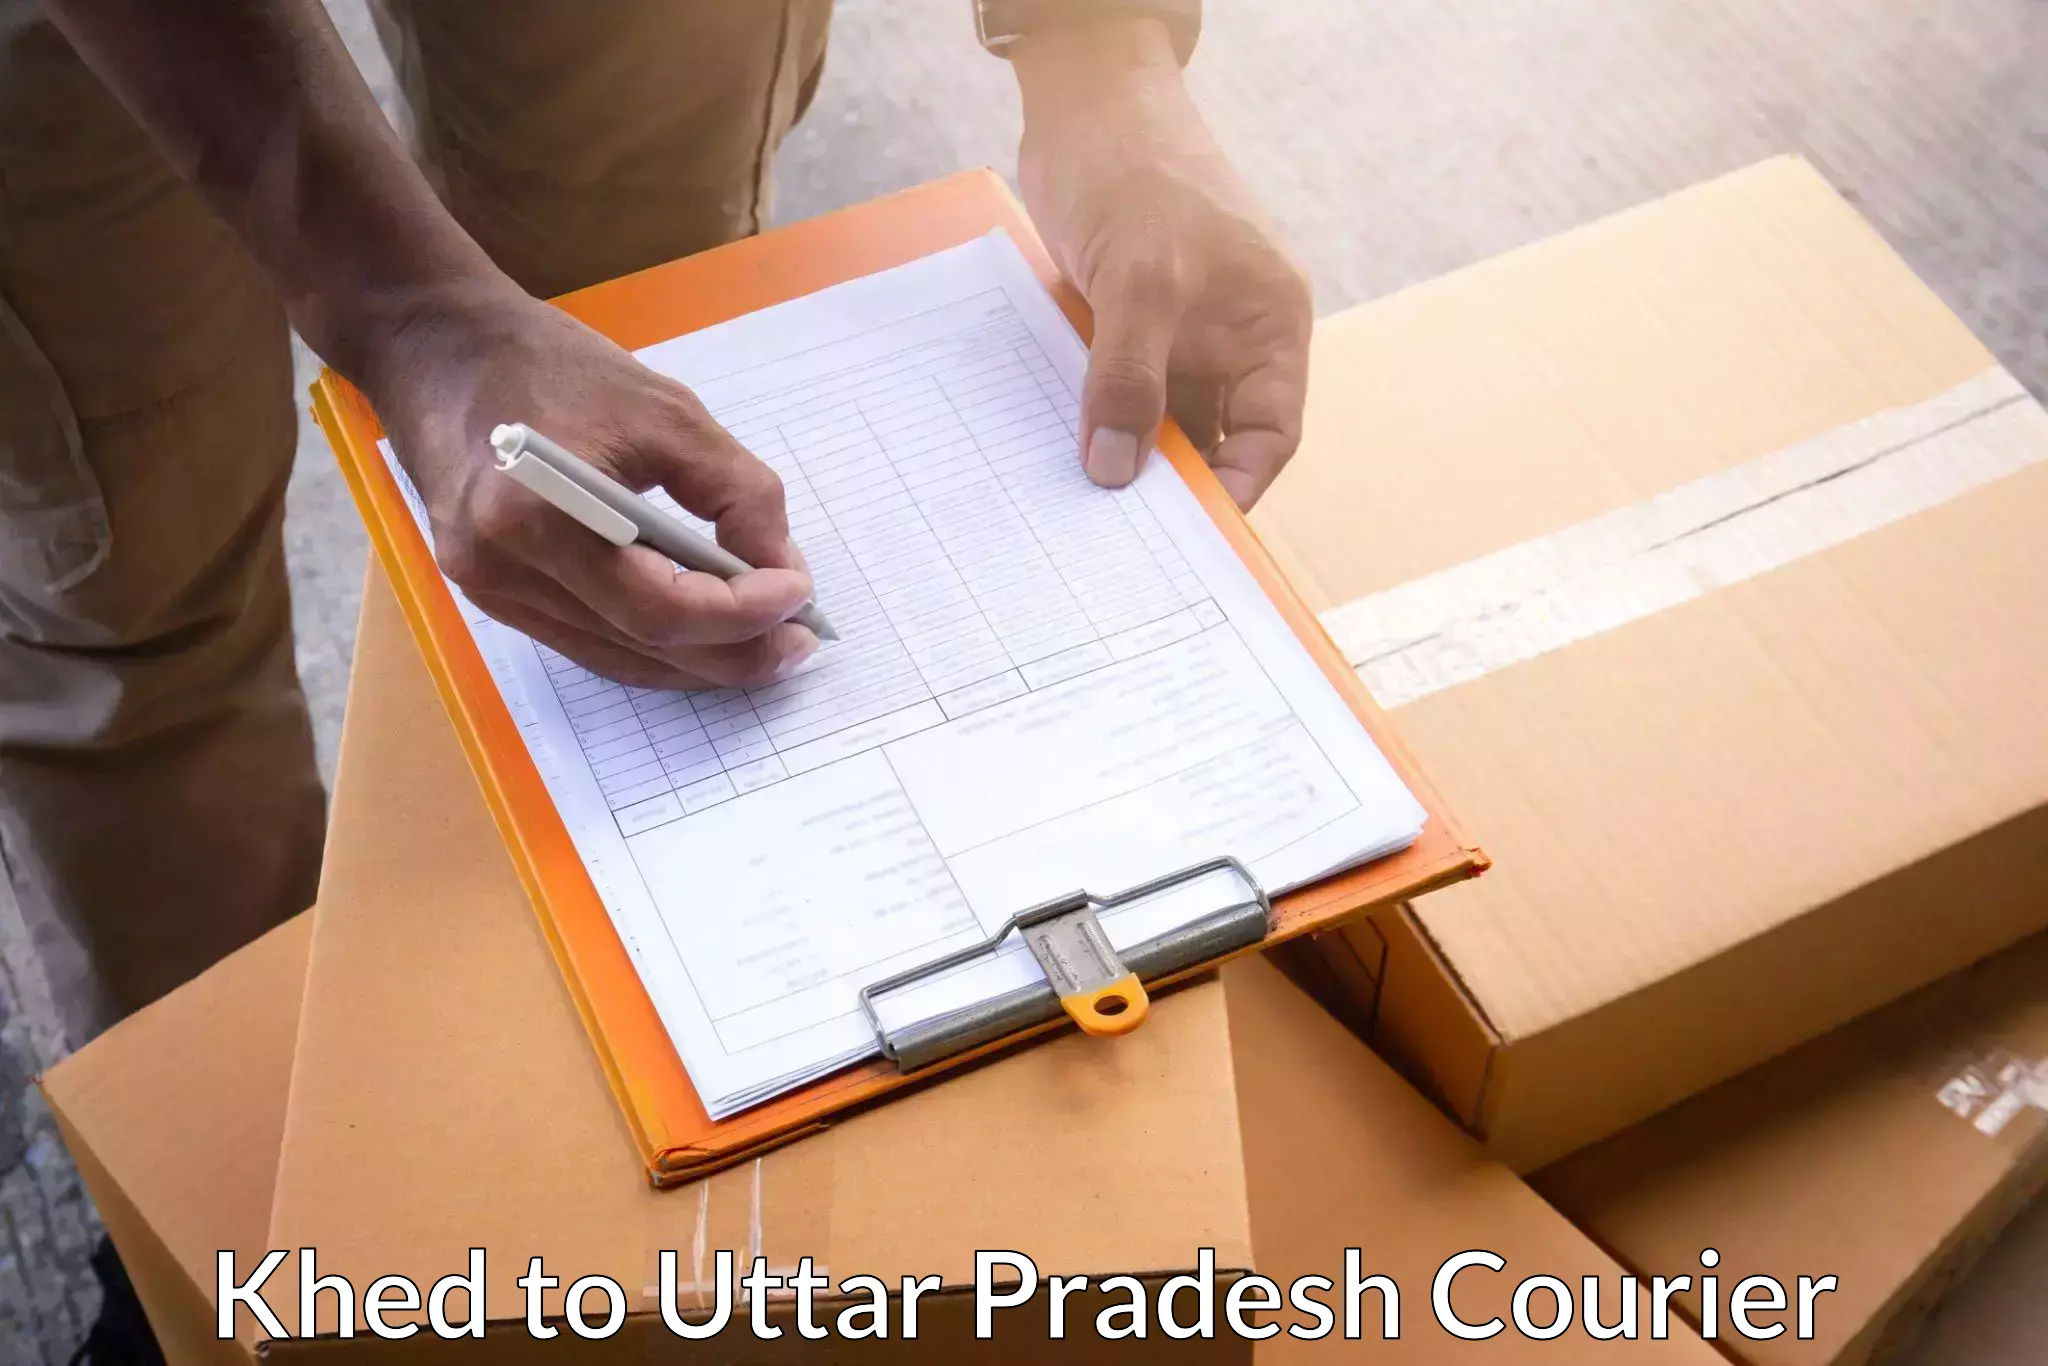 Bulk courier orders Khed to Jewar